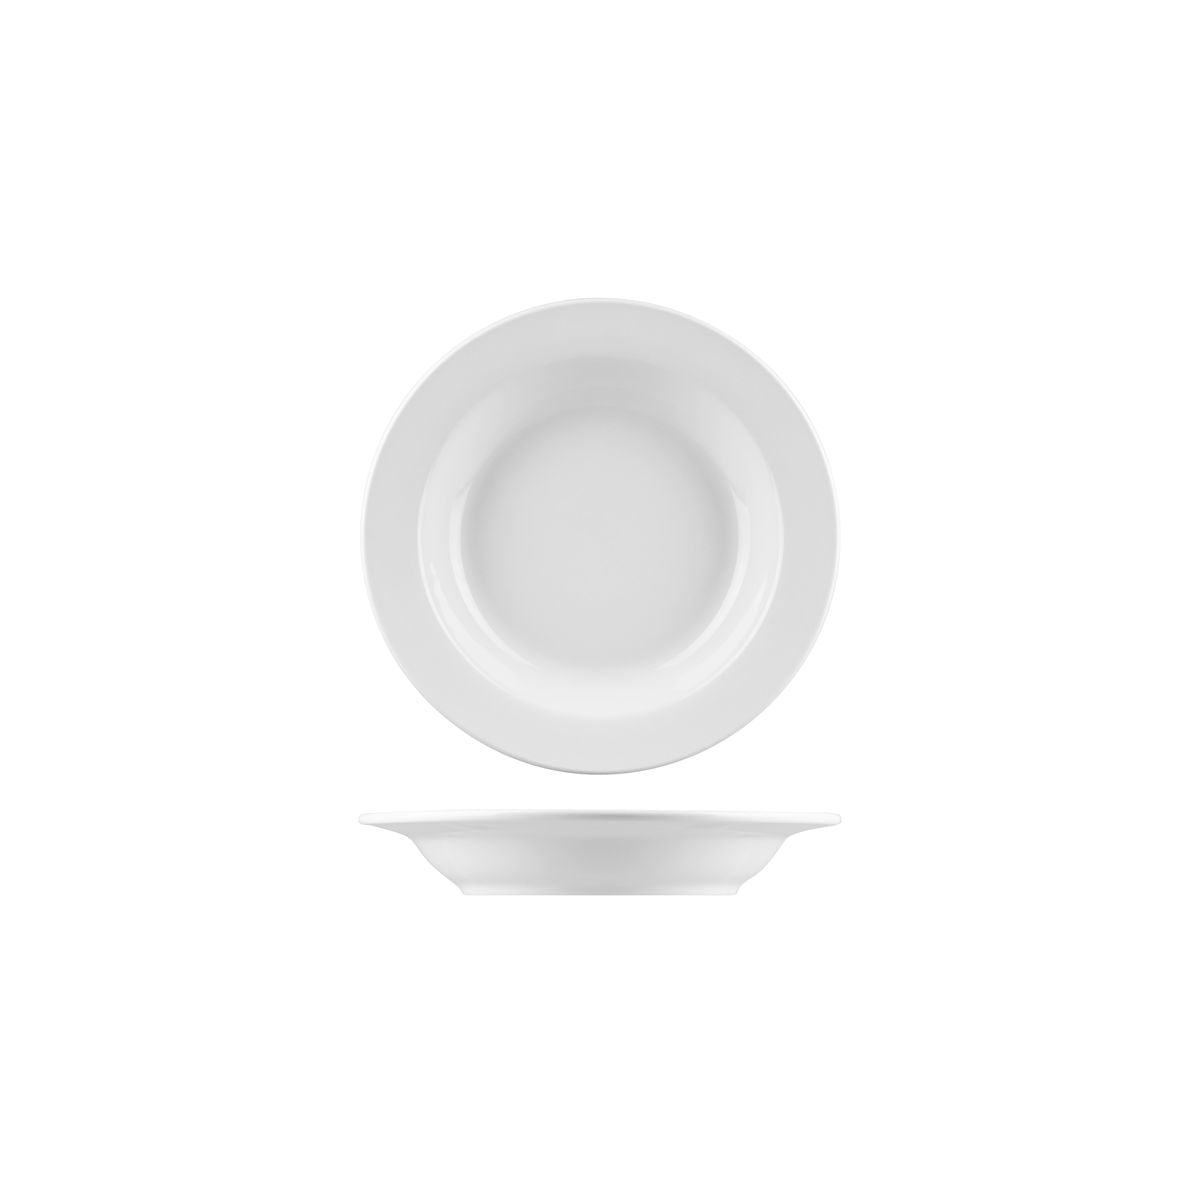 WESTERN SOUP PLATE - 230mm, Bistro